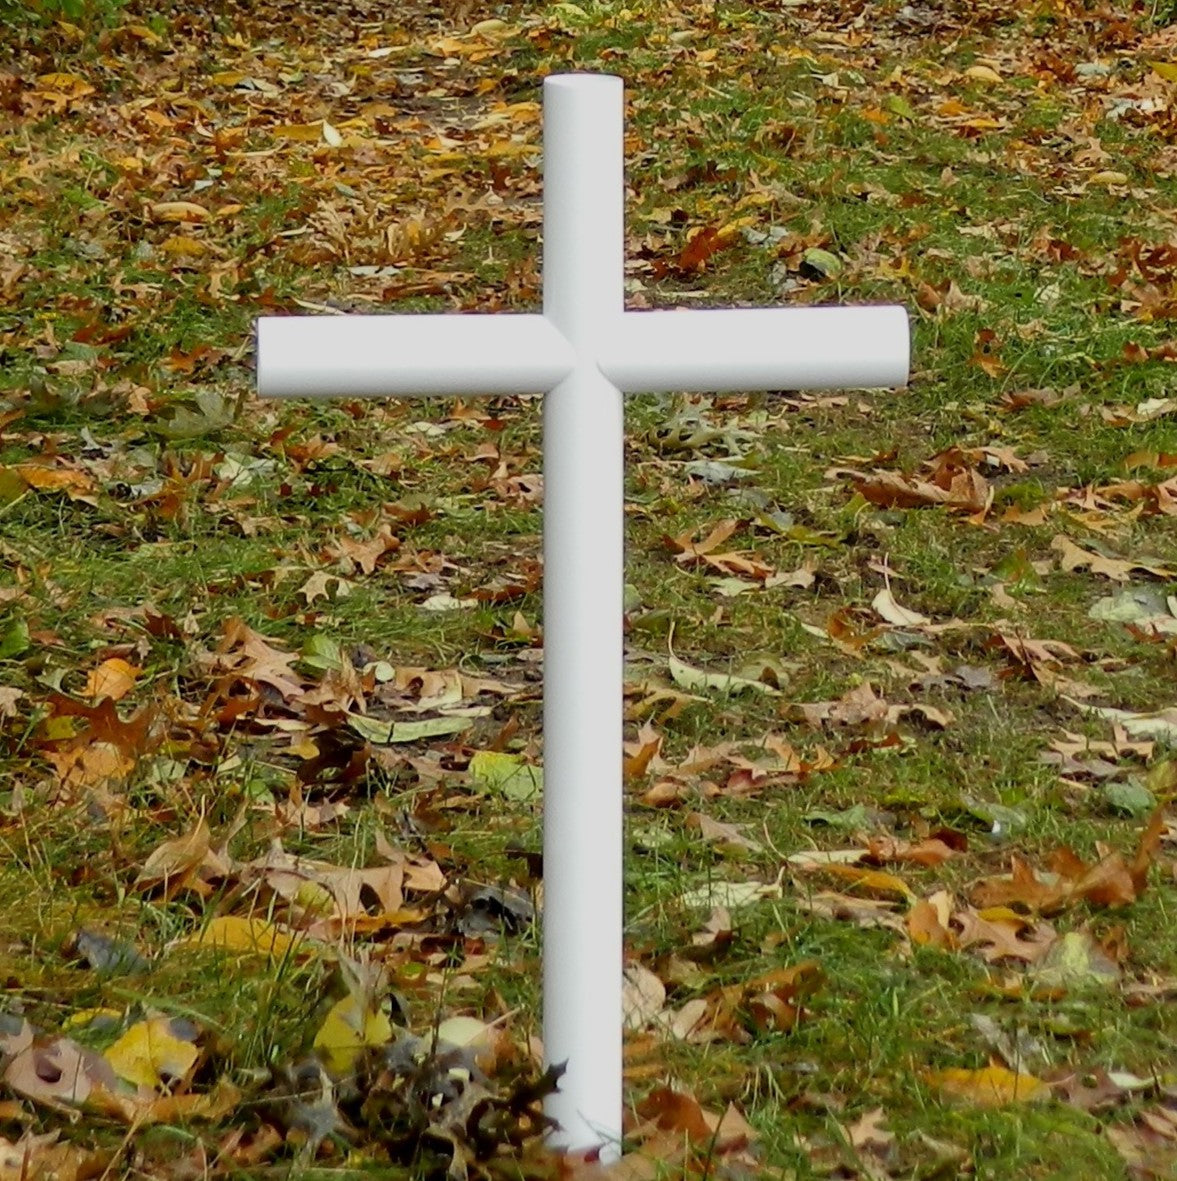 Everlasting Cross Memorial In White Captures The Pure Love We Have For Our Loved One Loss. This Memorial Will Be Timeless Outdoor Memorial, Uniquely Engraved For The Loss Of One Who Has Passed